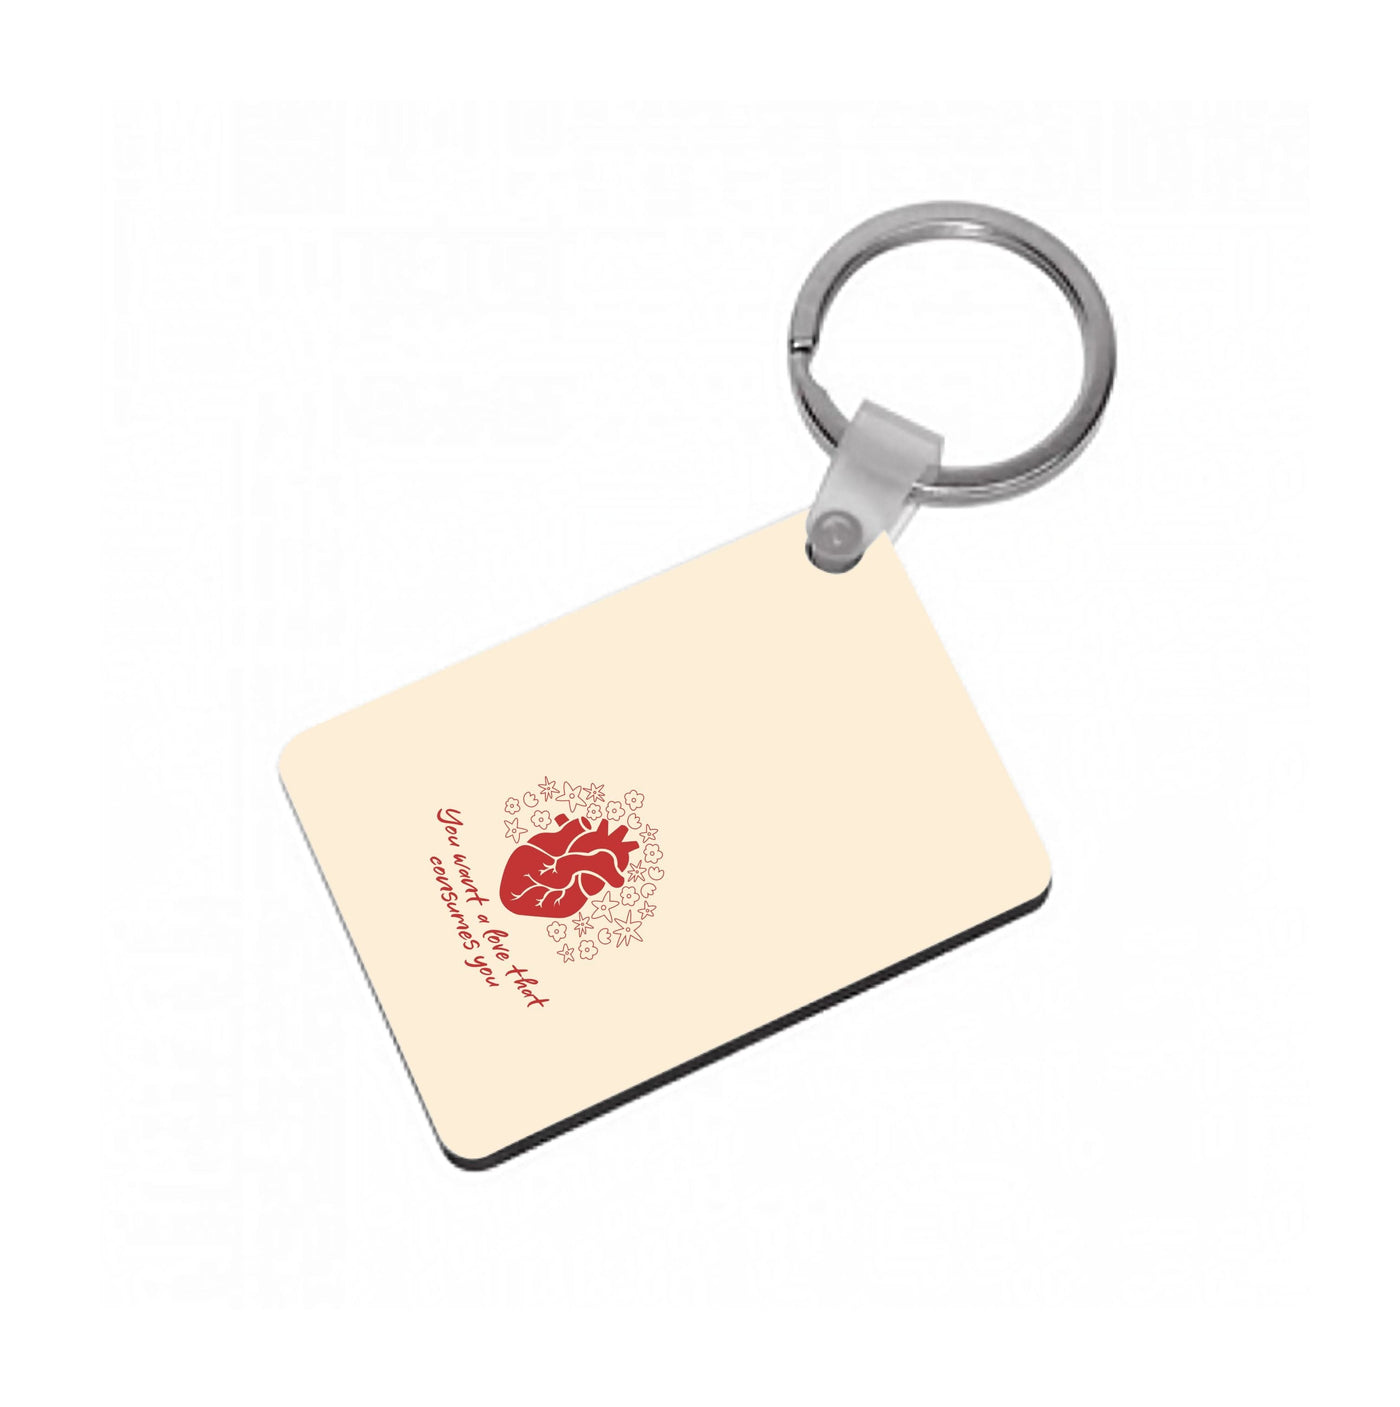 You Want A Love That Consumes You - Vampire Diaries Keyring